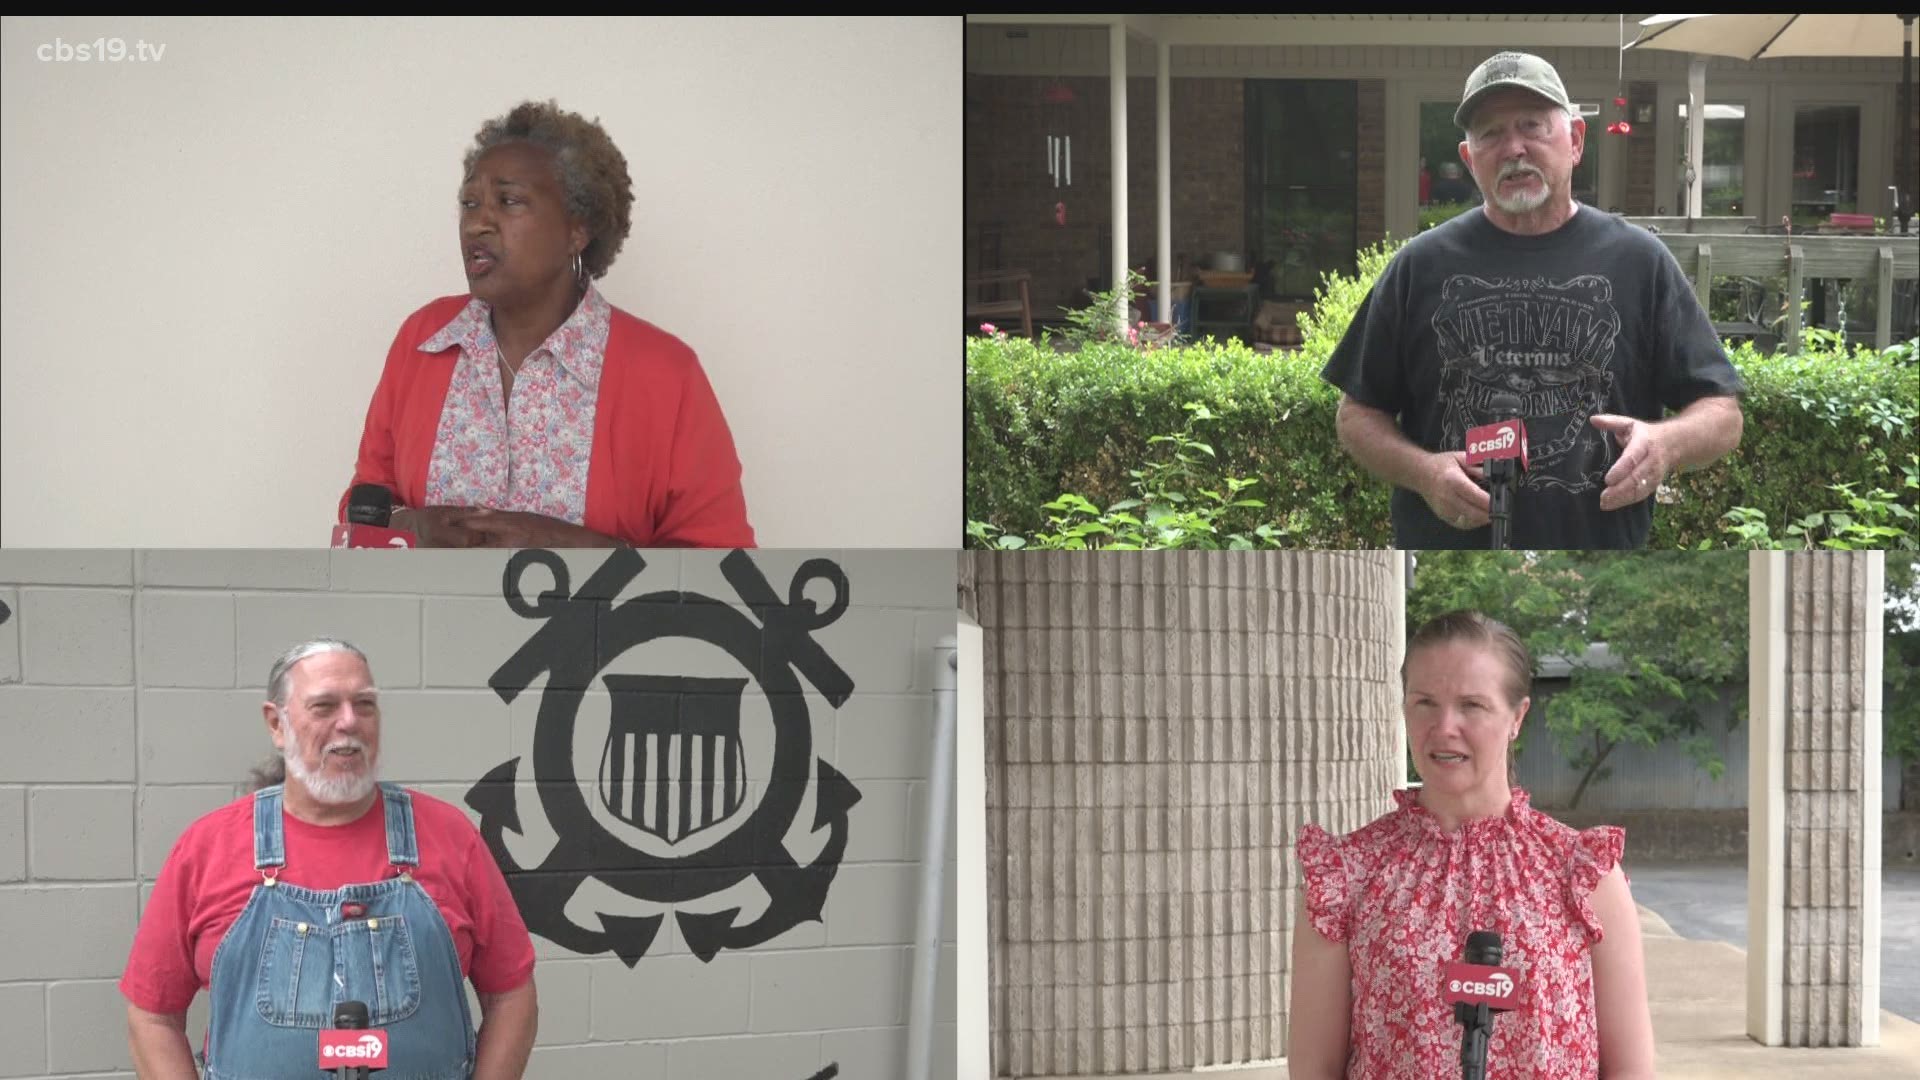 CBS19 spoke with four veterans representing three different branches of the military.